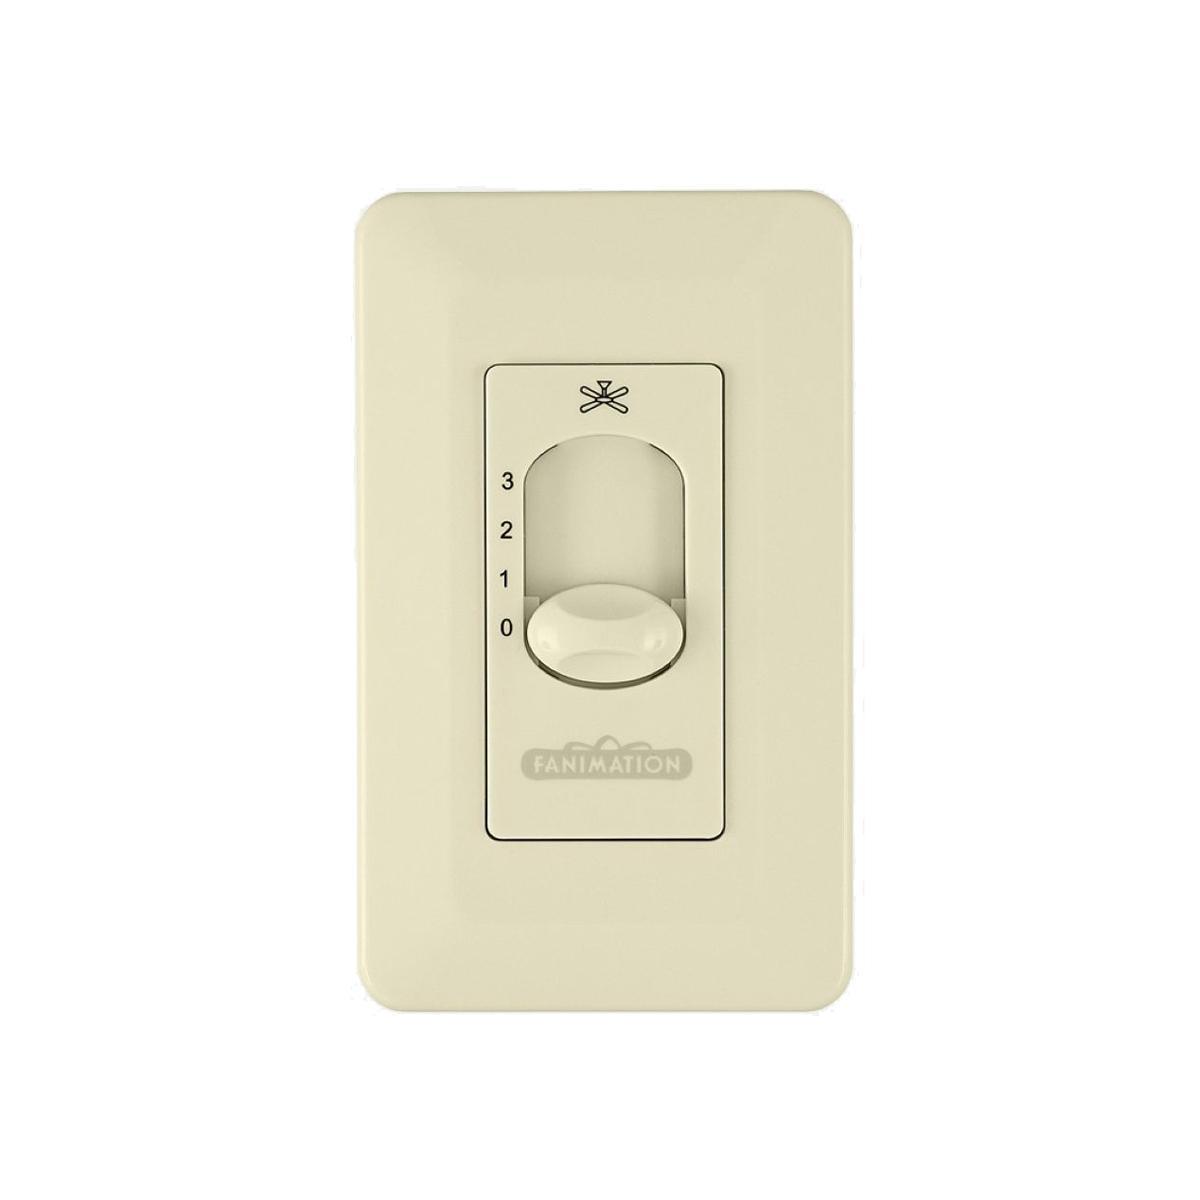 3-Speed Ceiling Fan Wall Control For 2 or More Fans, Non-Reversing